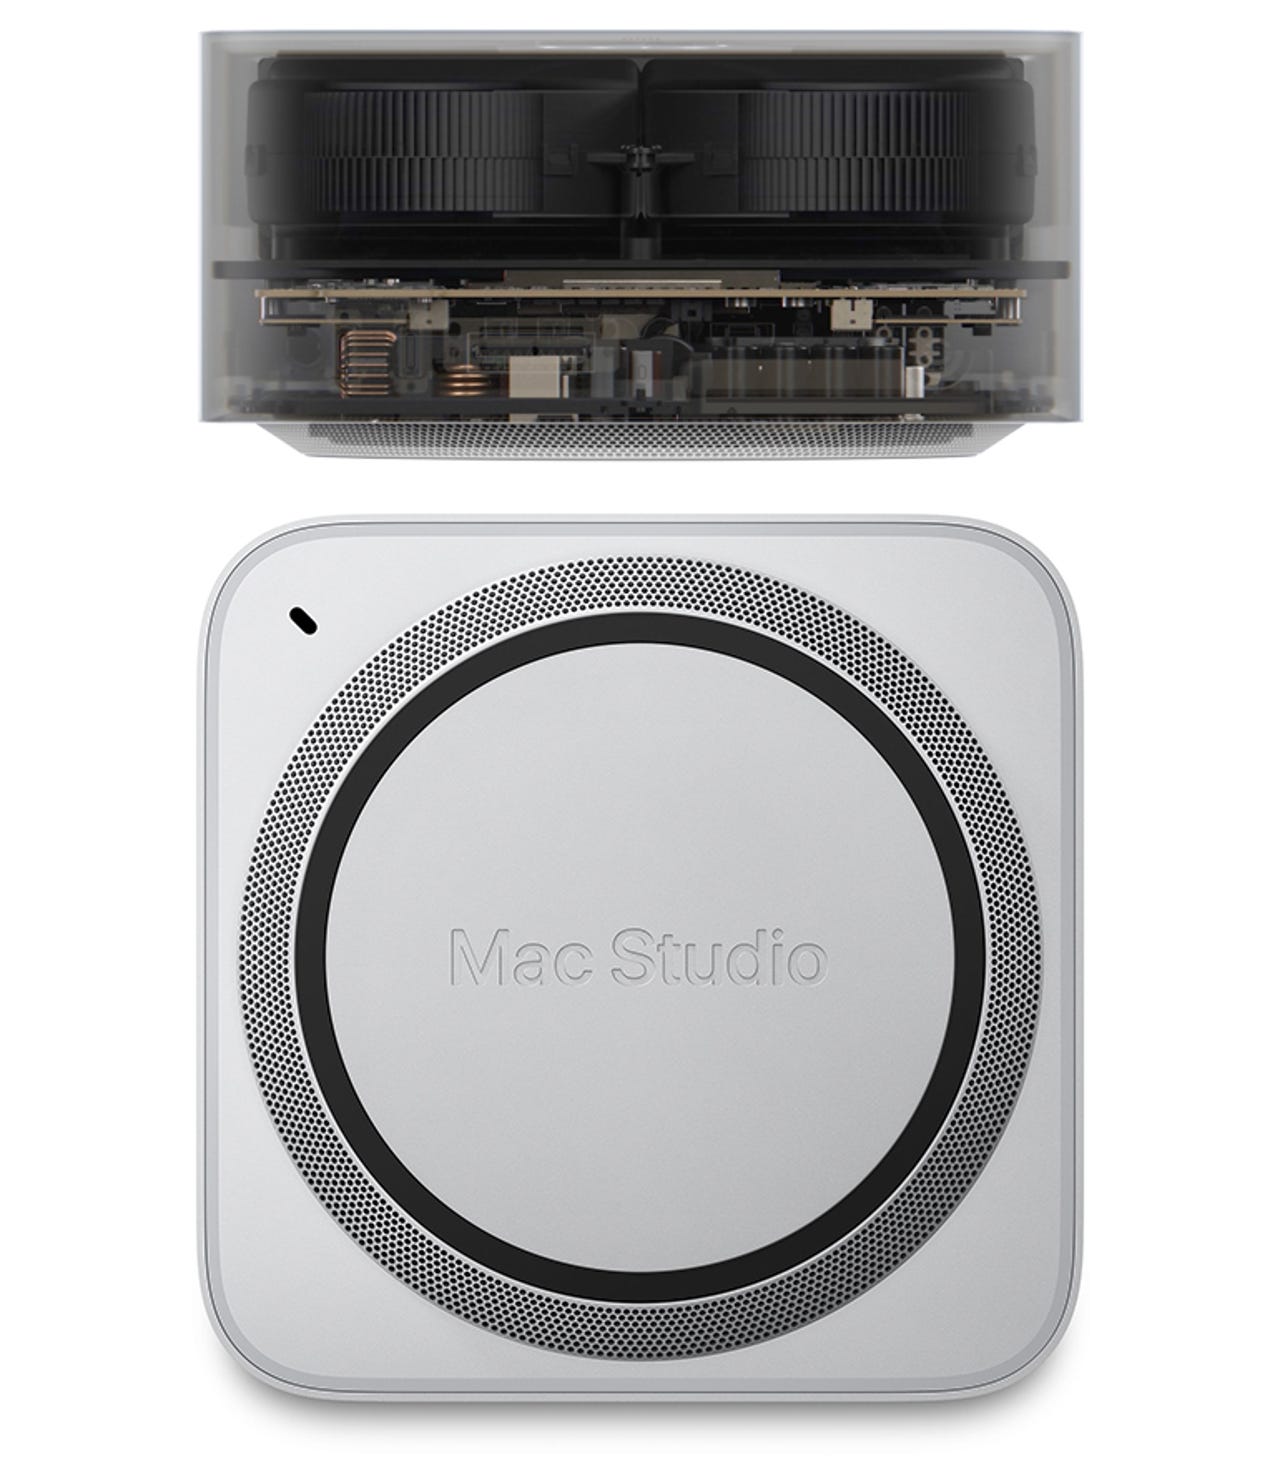 Mac Studio review: emerging from the Mac's midlife crisis